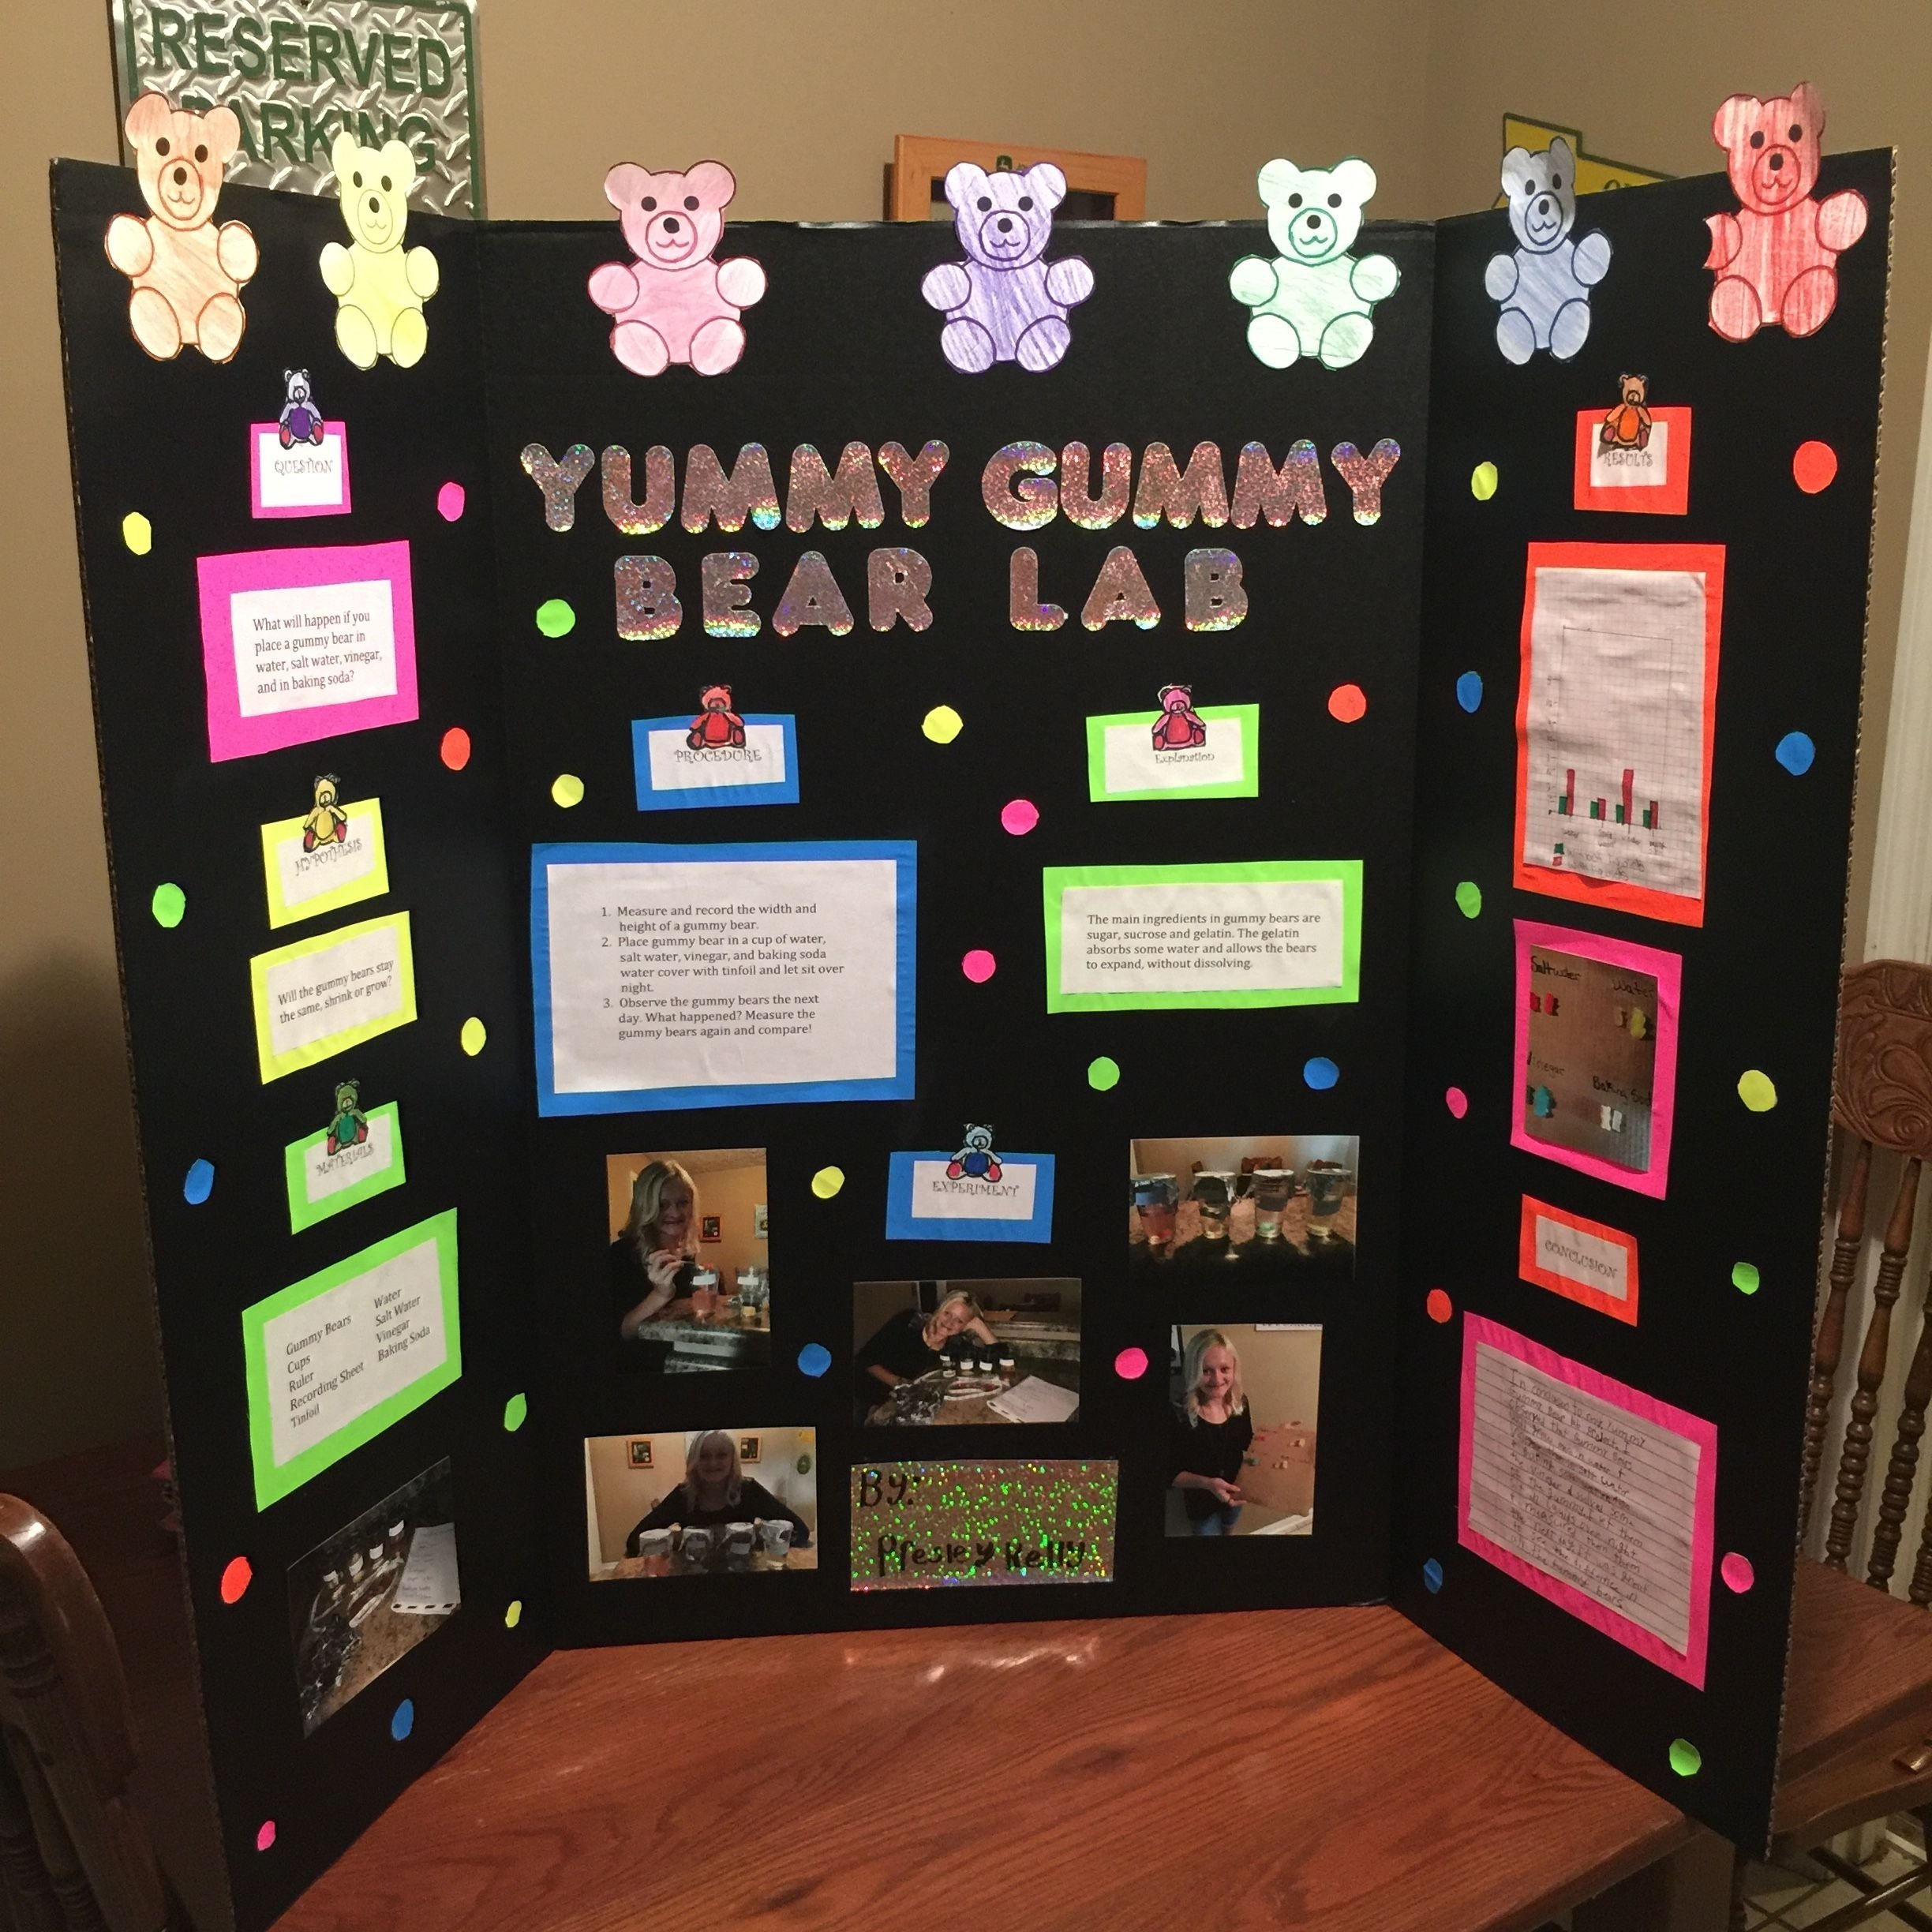 10 Attractive Science Fair Project Ideas For 3Rd Grade our 4th grade science fair project yummy gummy bear lab lots of 17 2022